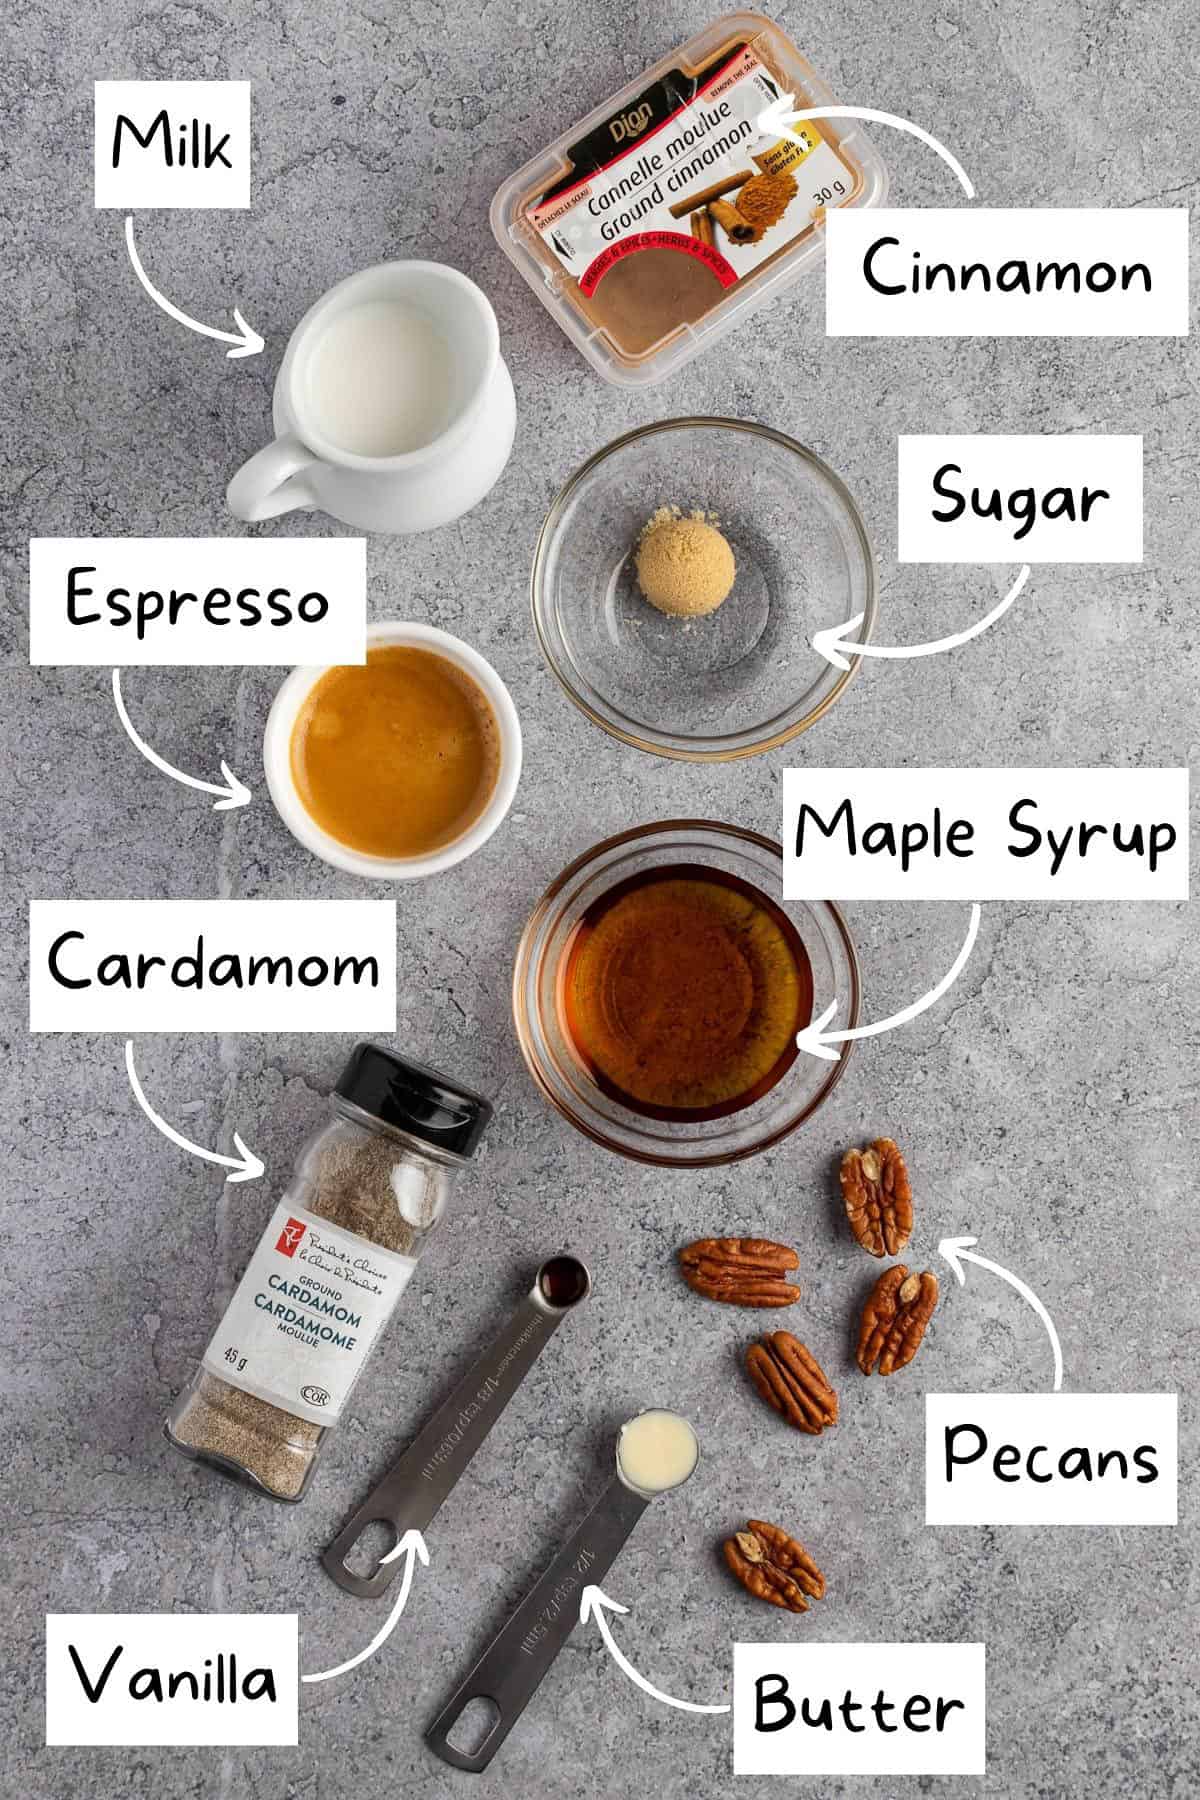 The ingredients needed to make the maple latte.